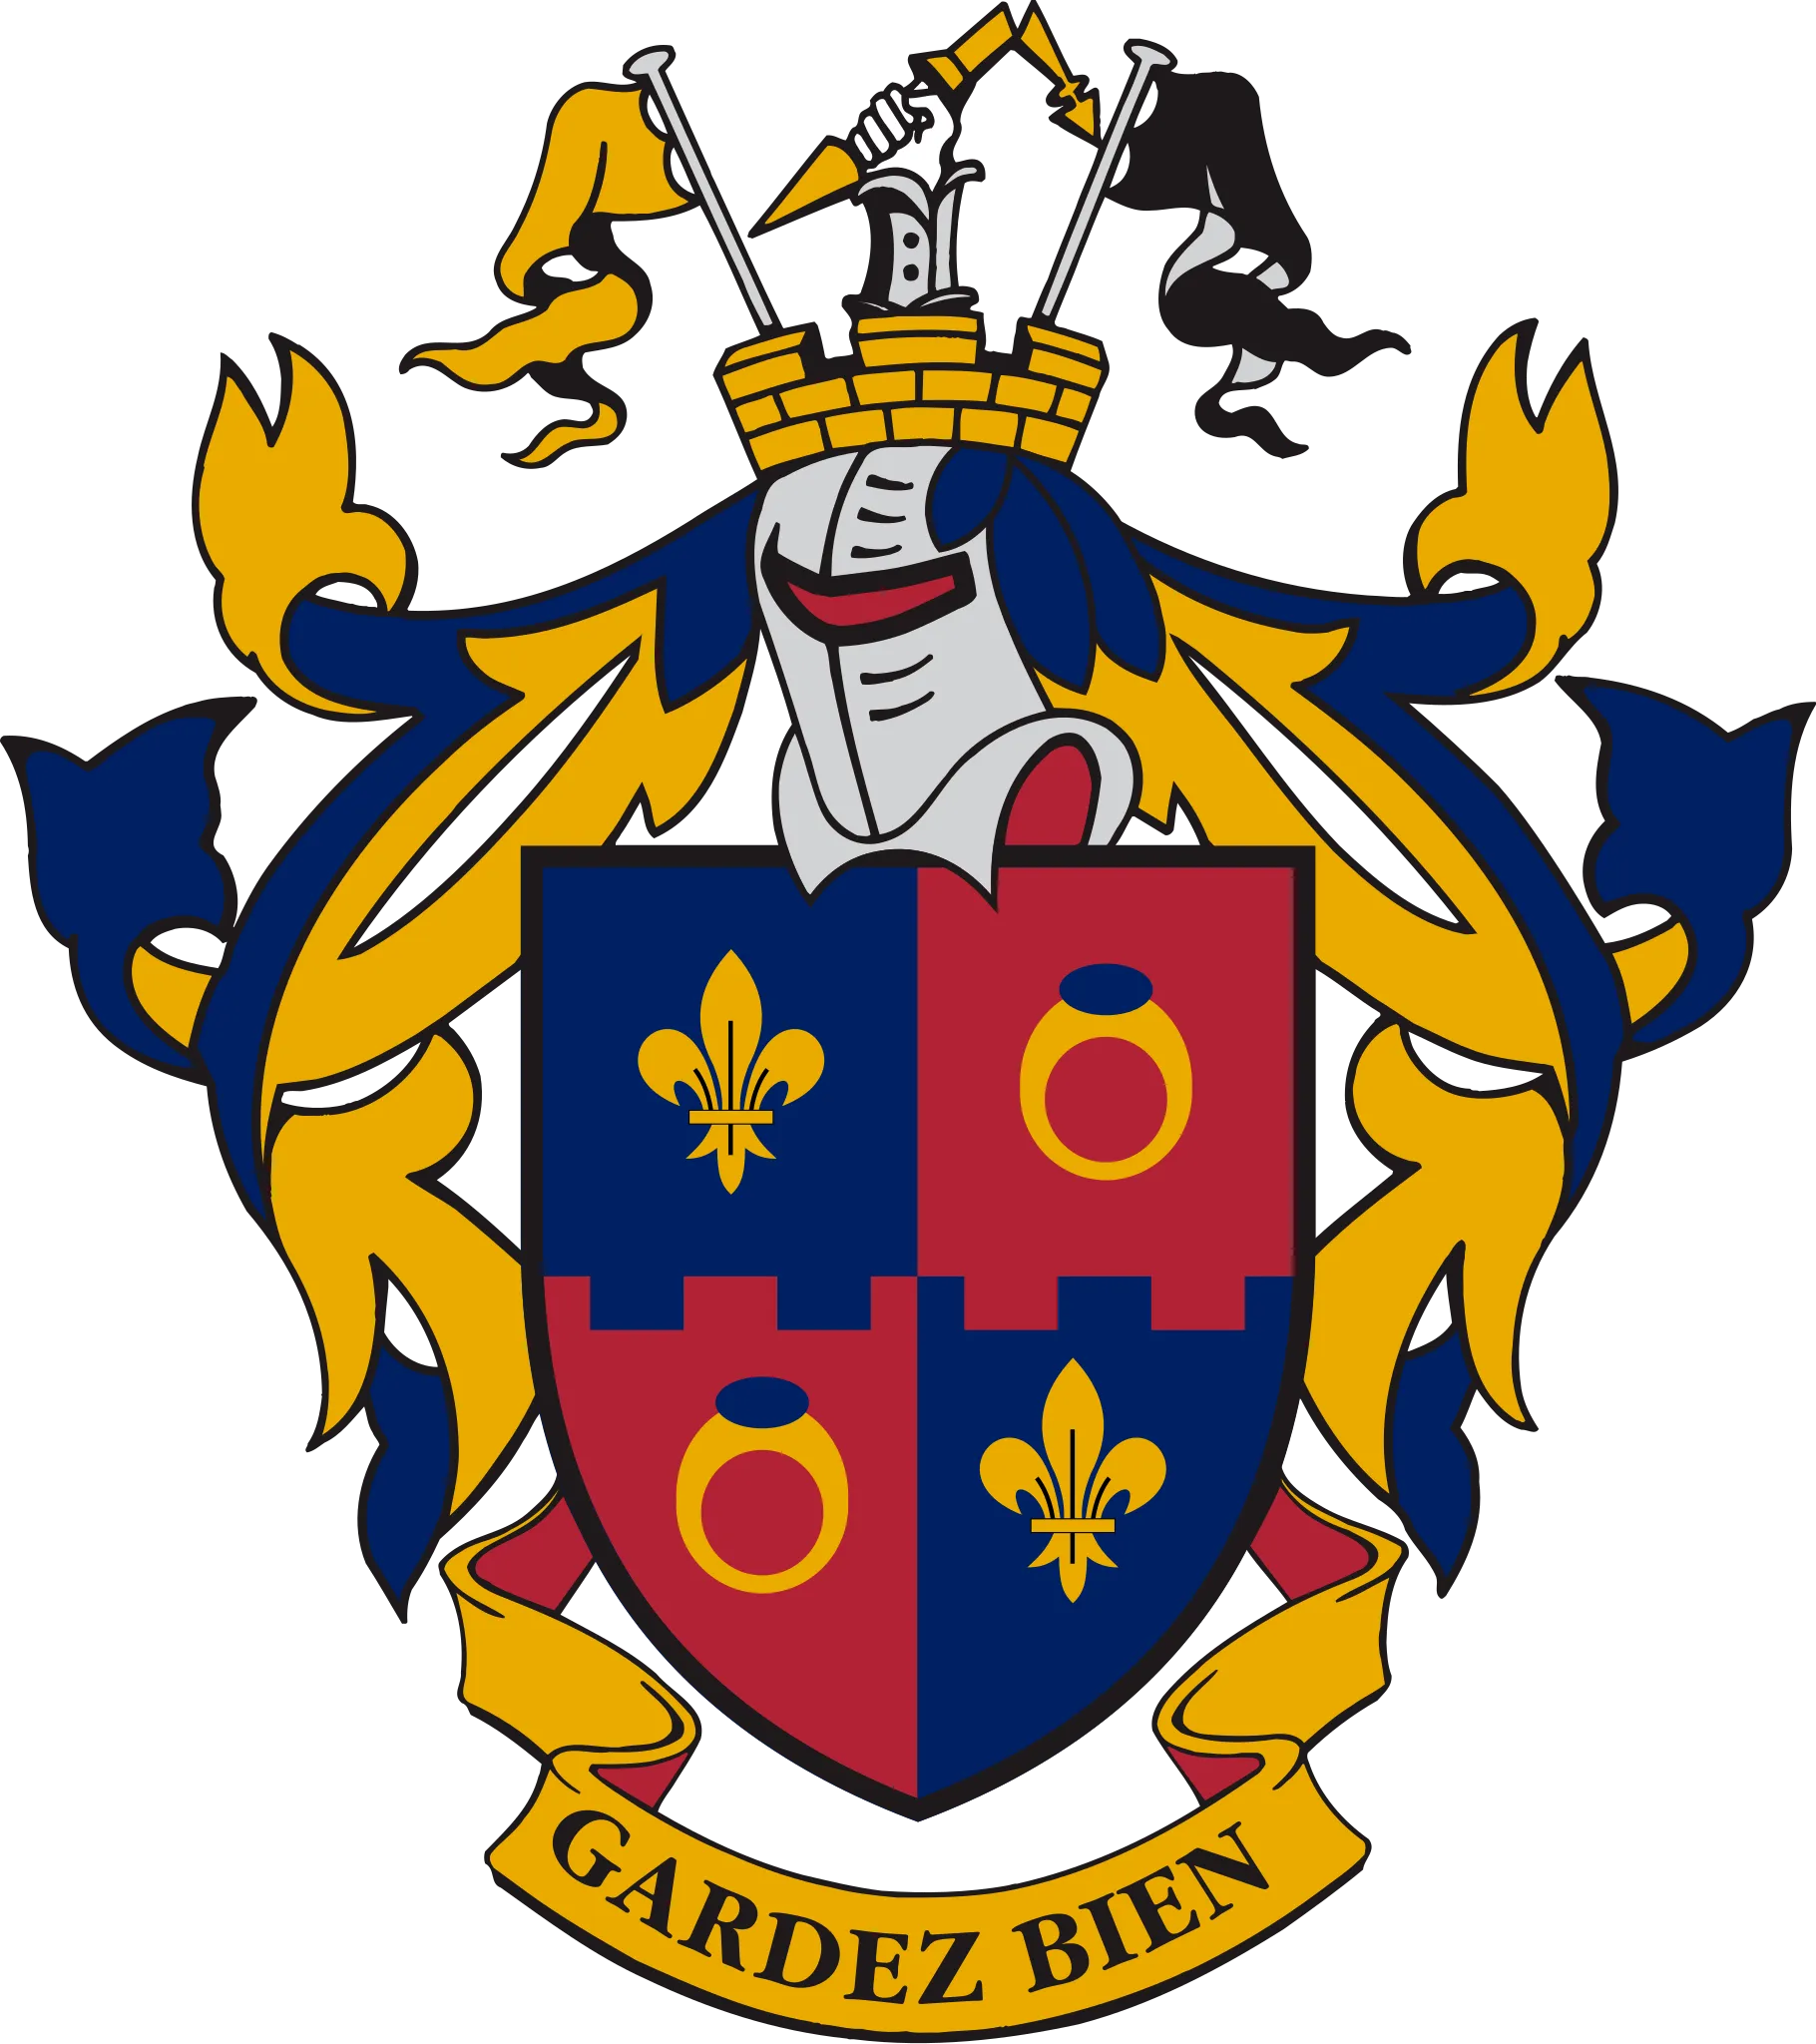 The Arms of Montgomery County